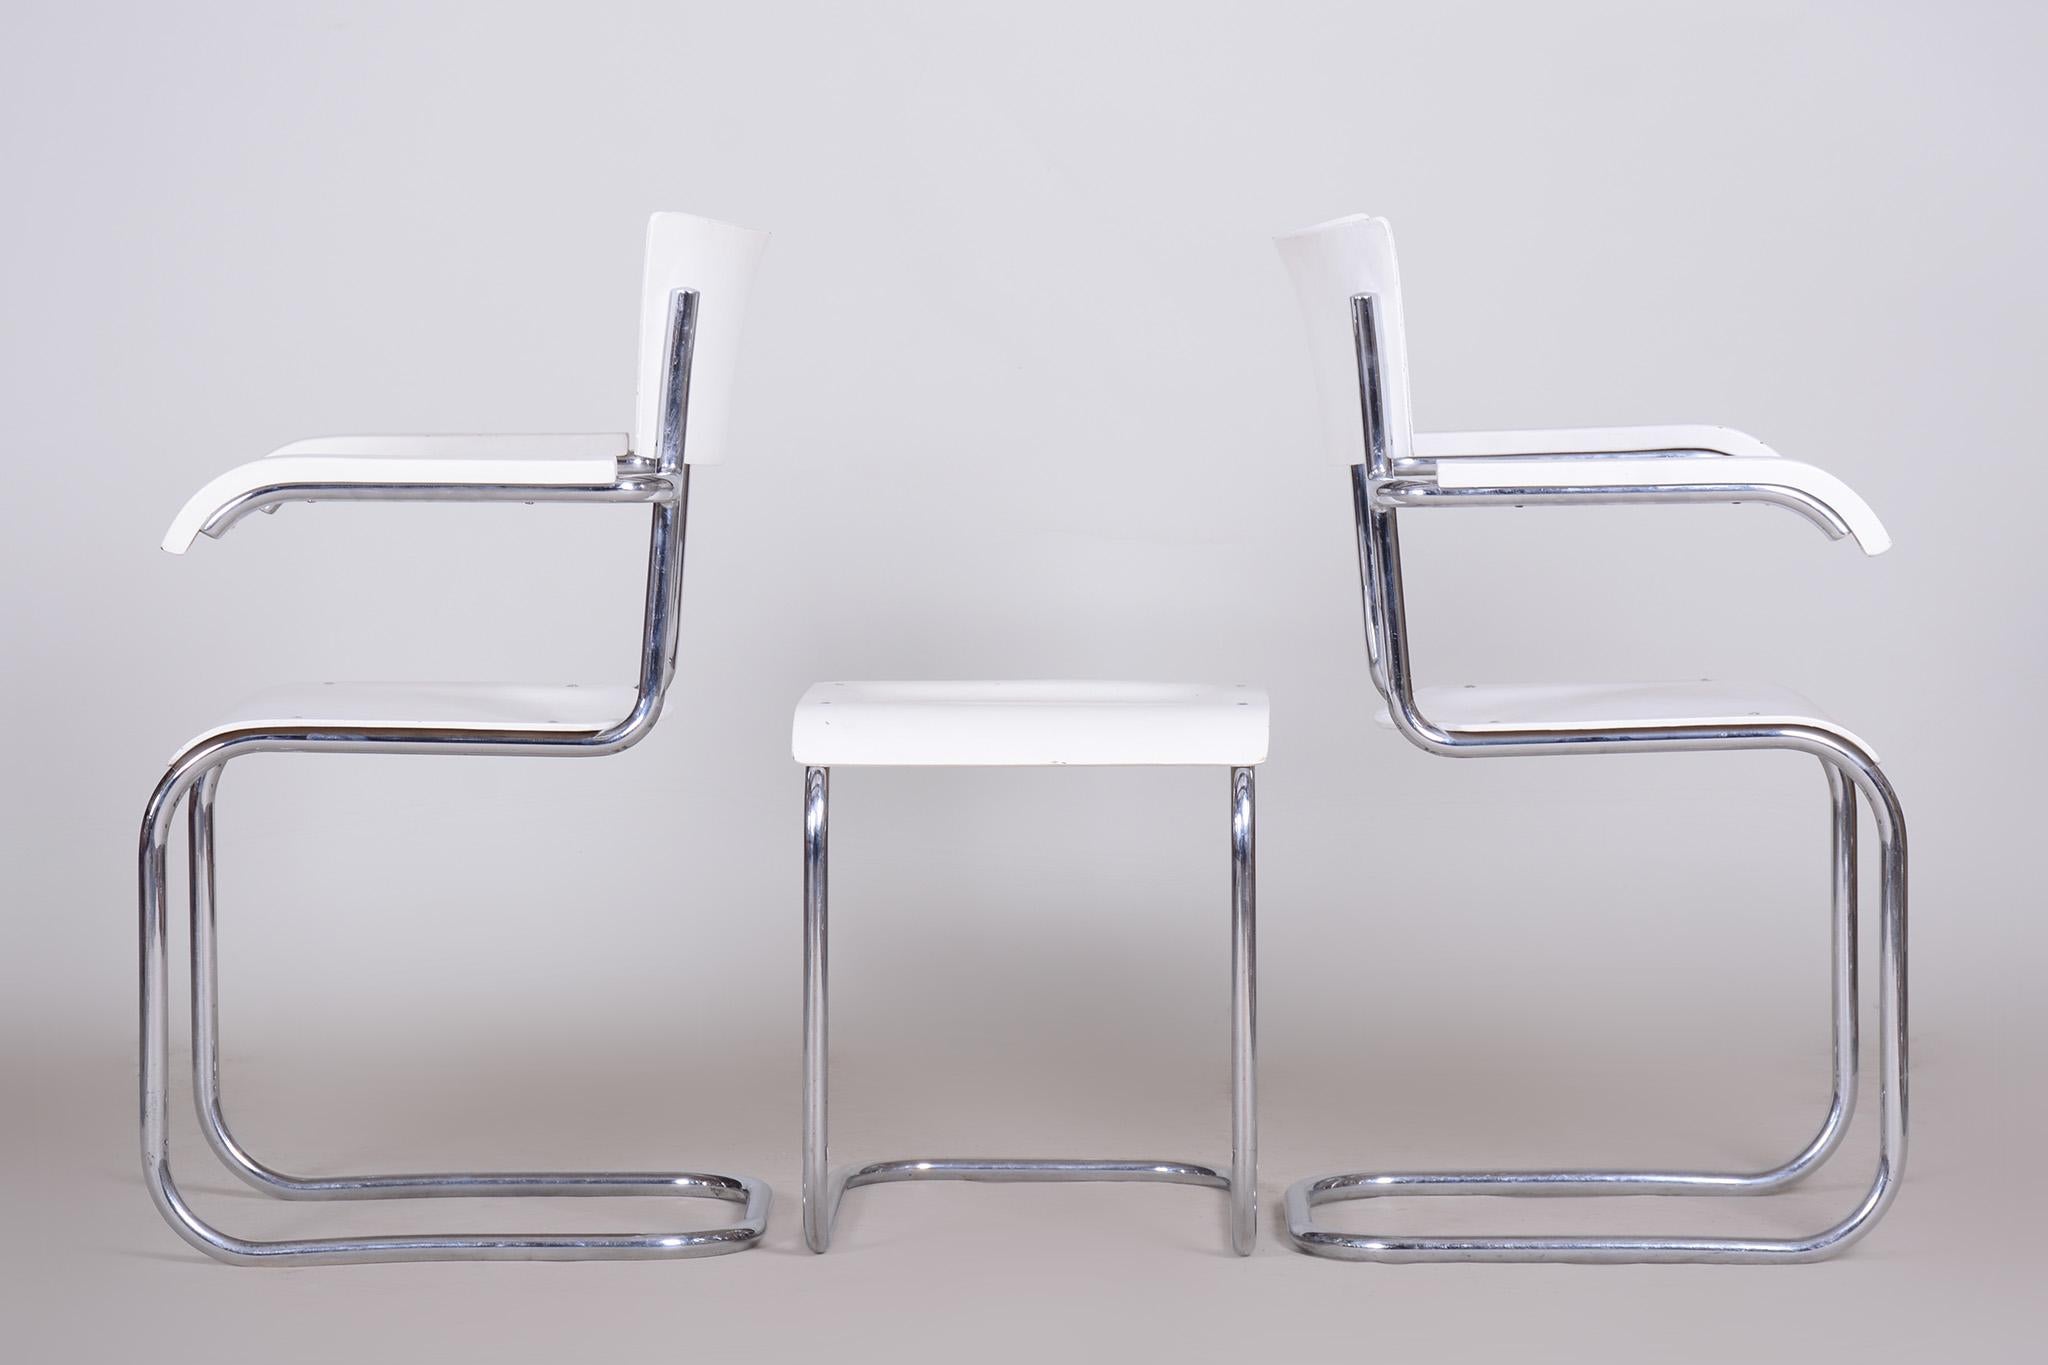 Pair of Original White Mucke Melder Chairs and Stool Made in 1930s Czechia For Sale 6